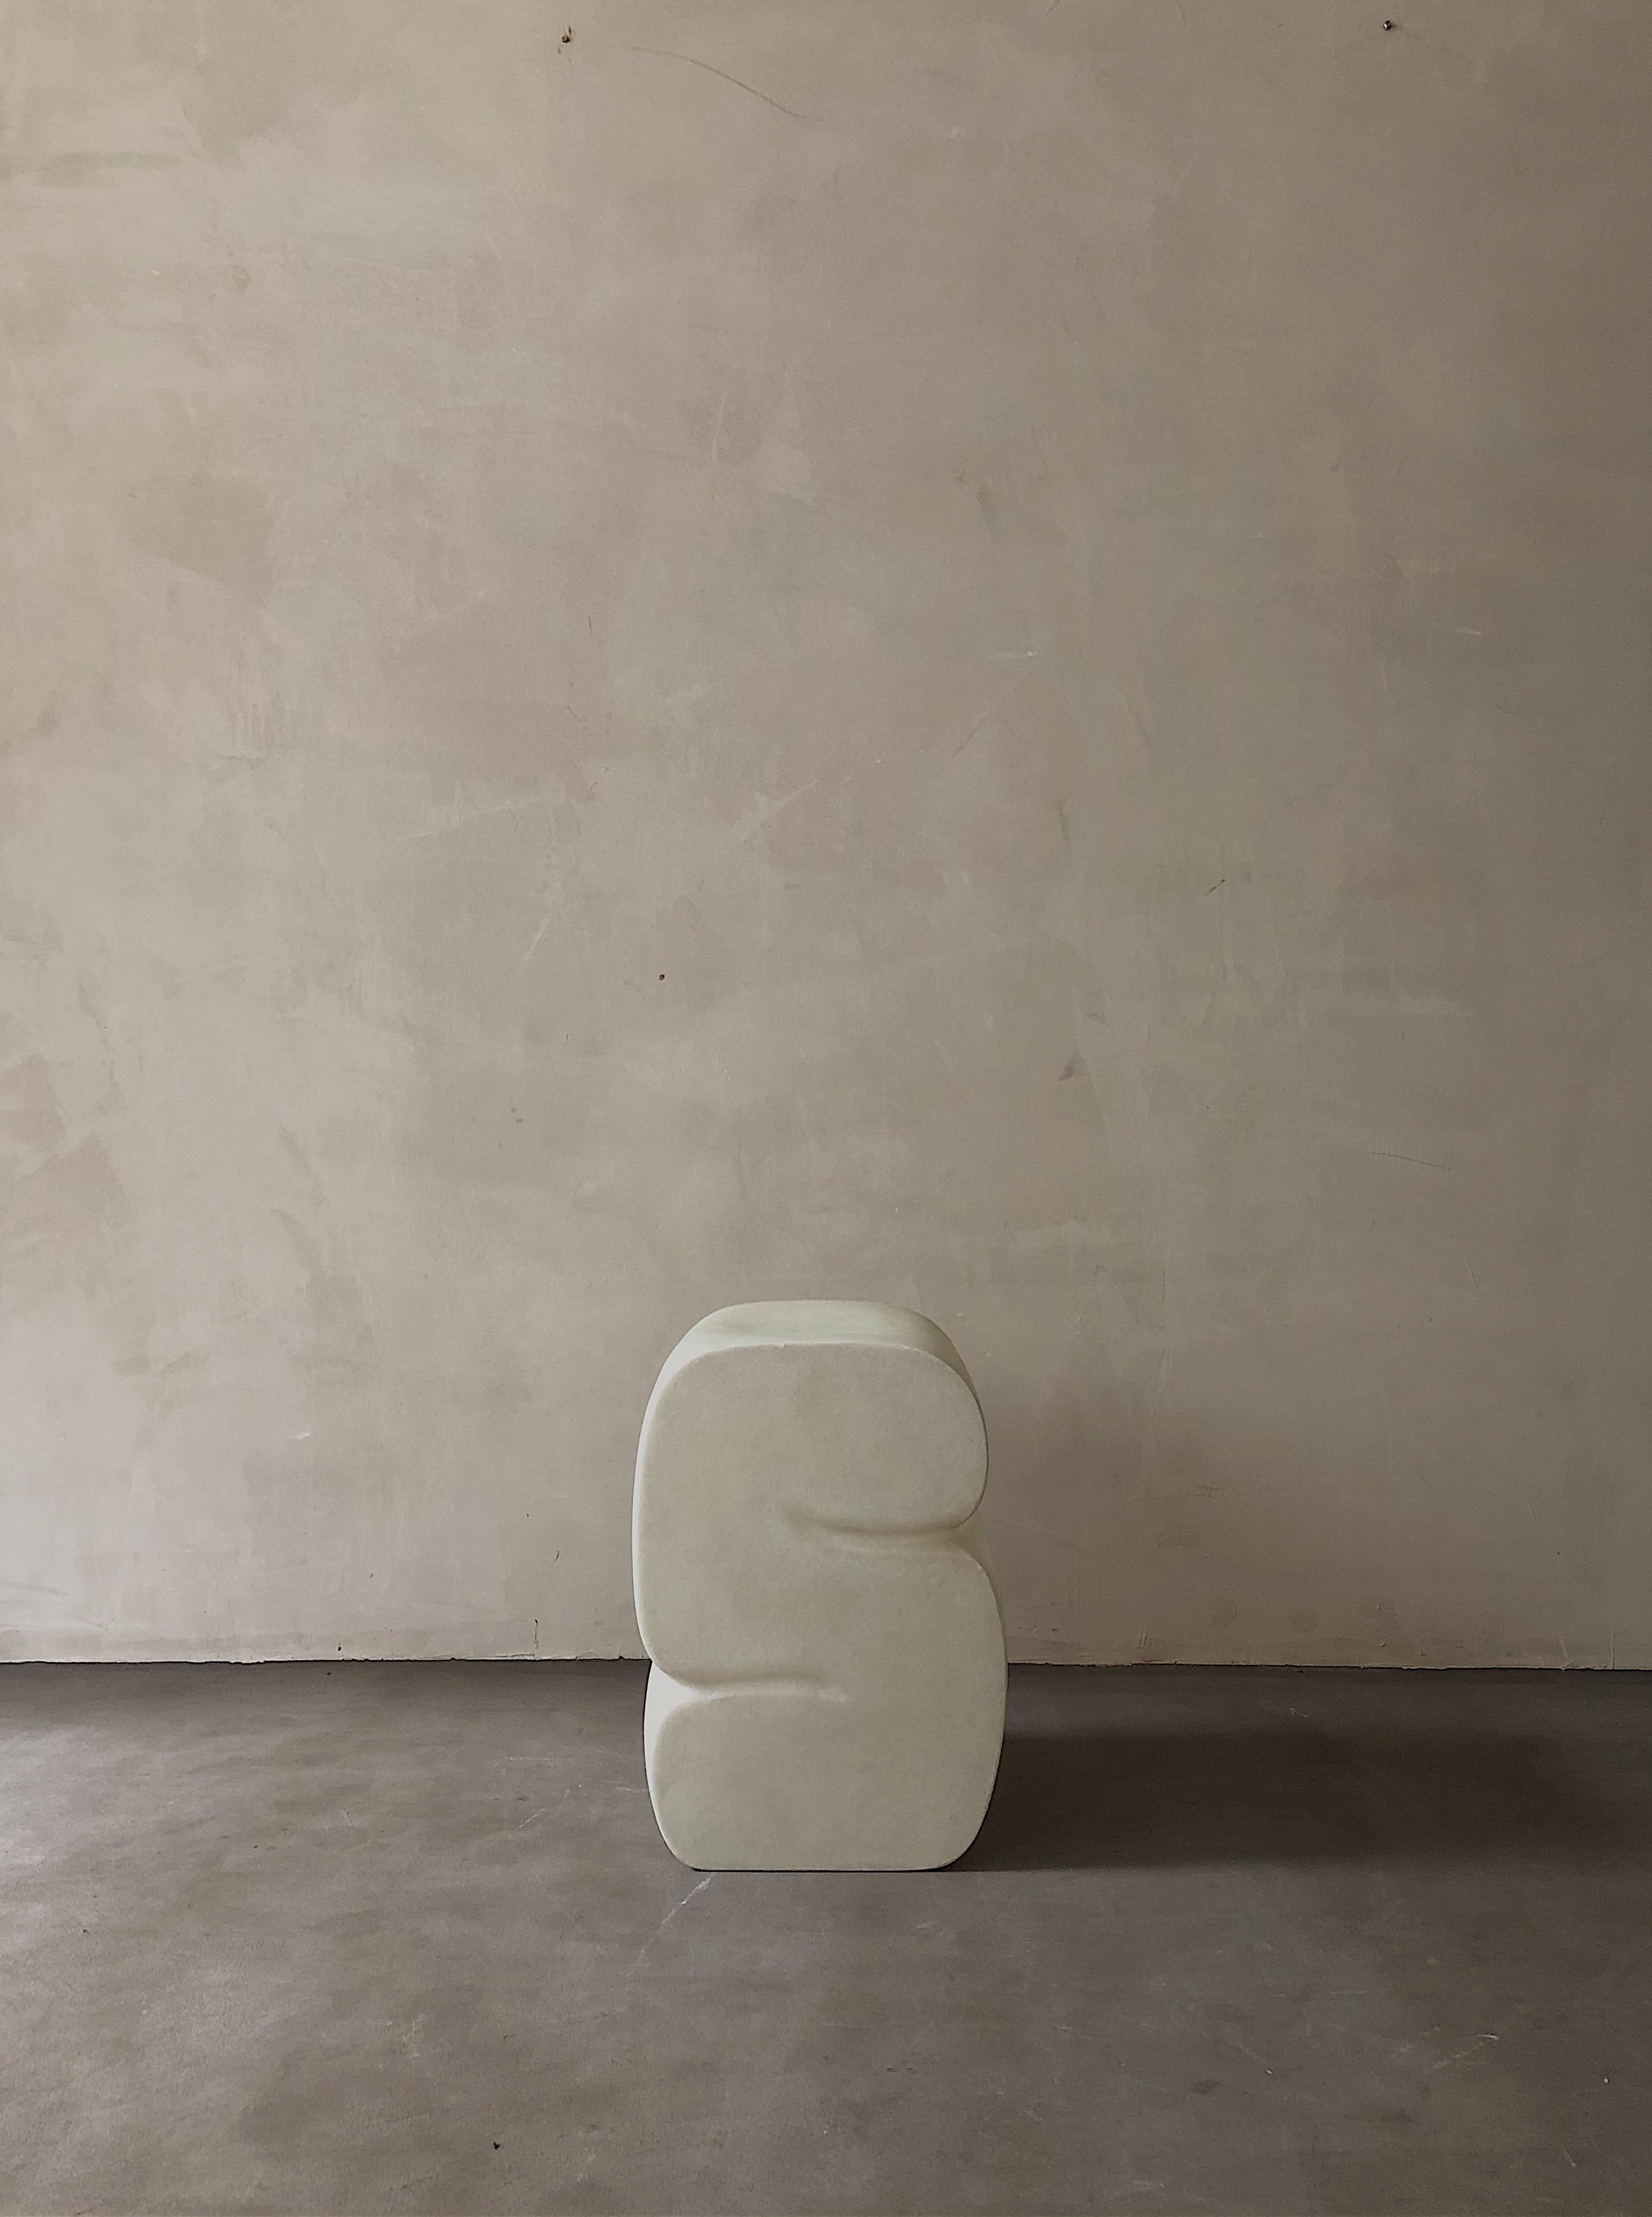 White stool by Karstudio
Materials: FRP
Dimensions: 32 x 32 x 45 cm

It shapes in a curl-up position, casual meanwhile restrained. The side designed as a cross-section of the furniture to present the curve and texture.

Kar- is the root of